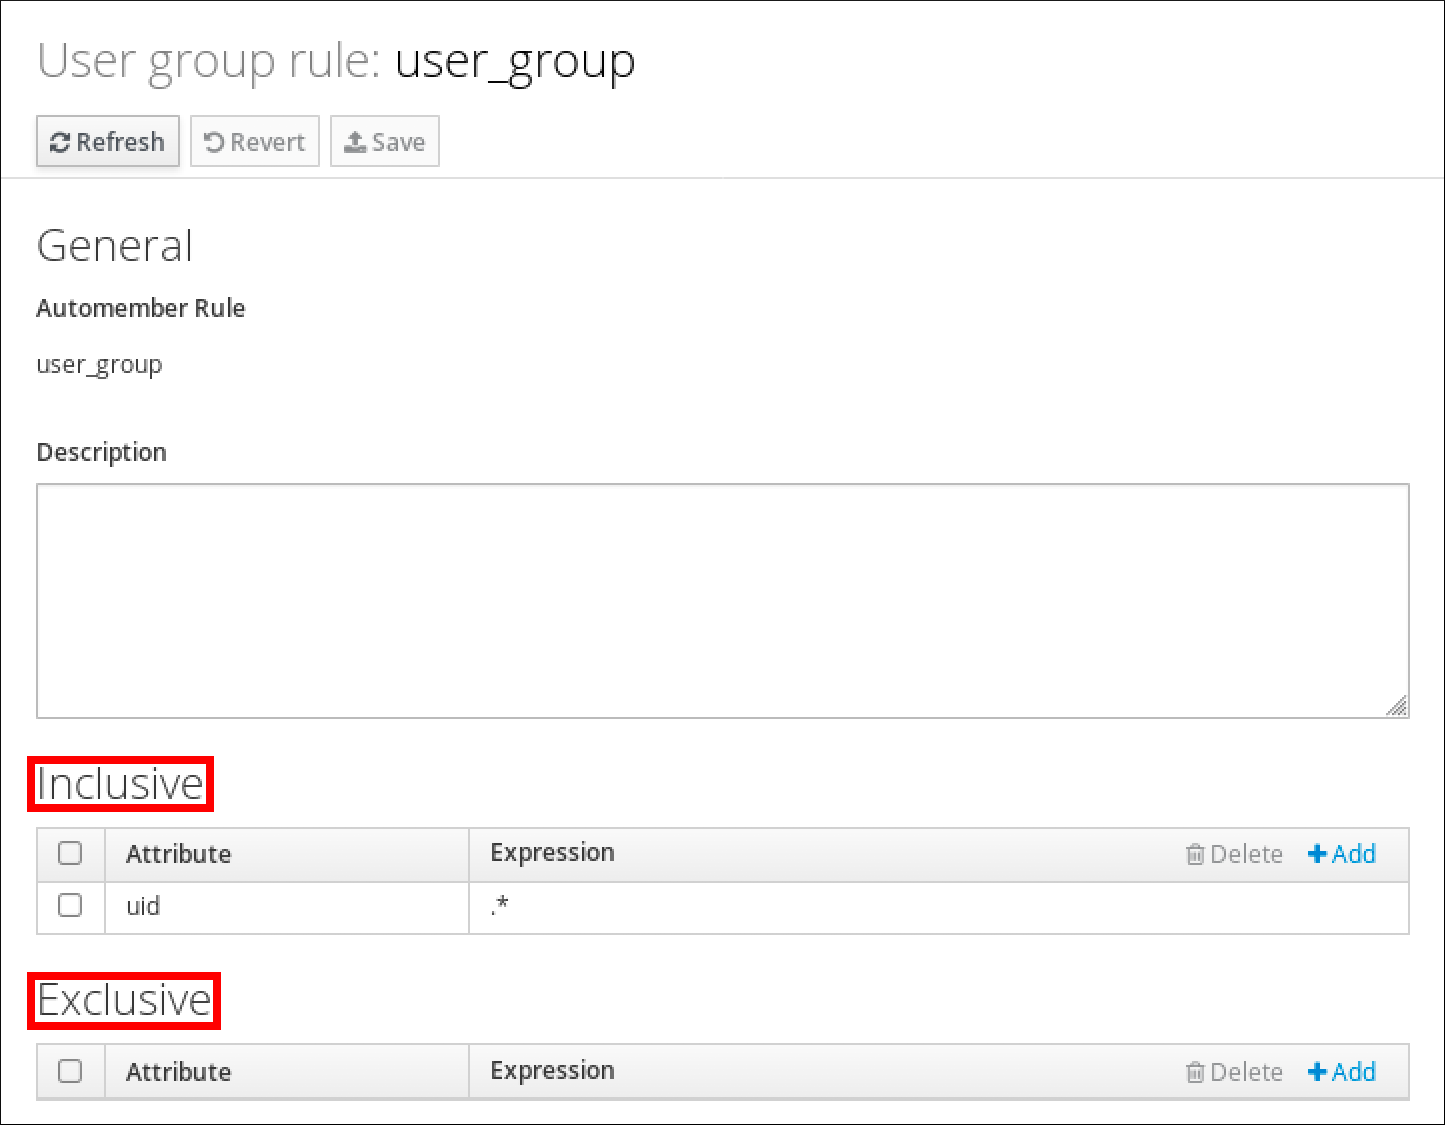 A screenshot of the details of the user group rule "user_group." There is a "General" section displaying the name of the Automember rule and a "Description." There is an "Inclusive" section at the bottom with a table displaying entries with columns labeled "Attribute" and "Expression." This table has one entry with uid as the Attribute and .* as the Expression. At the very bottom there is an "Exclusive" section with a table that matches the structure of the "Inclusive" table but it has no entries.